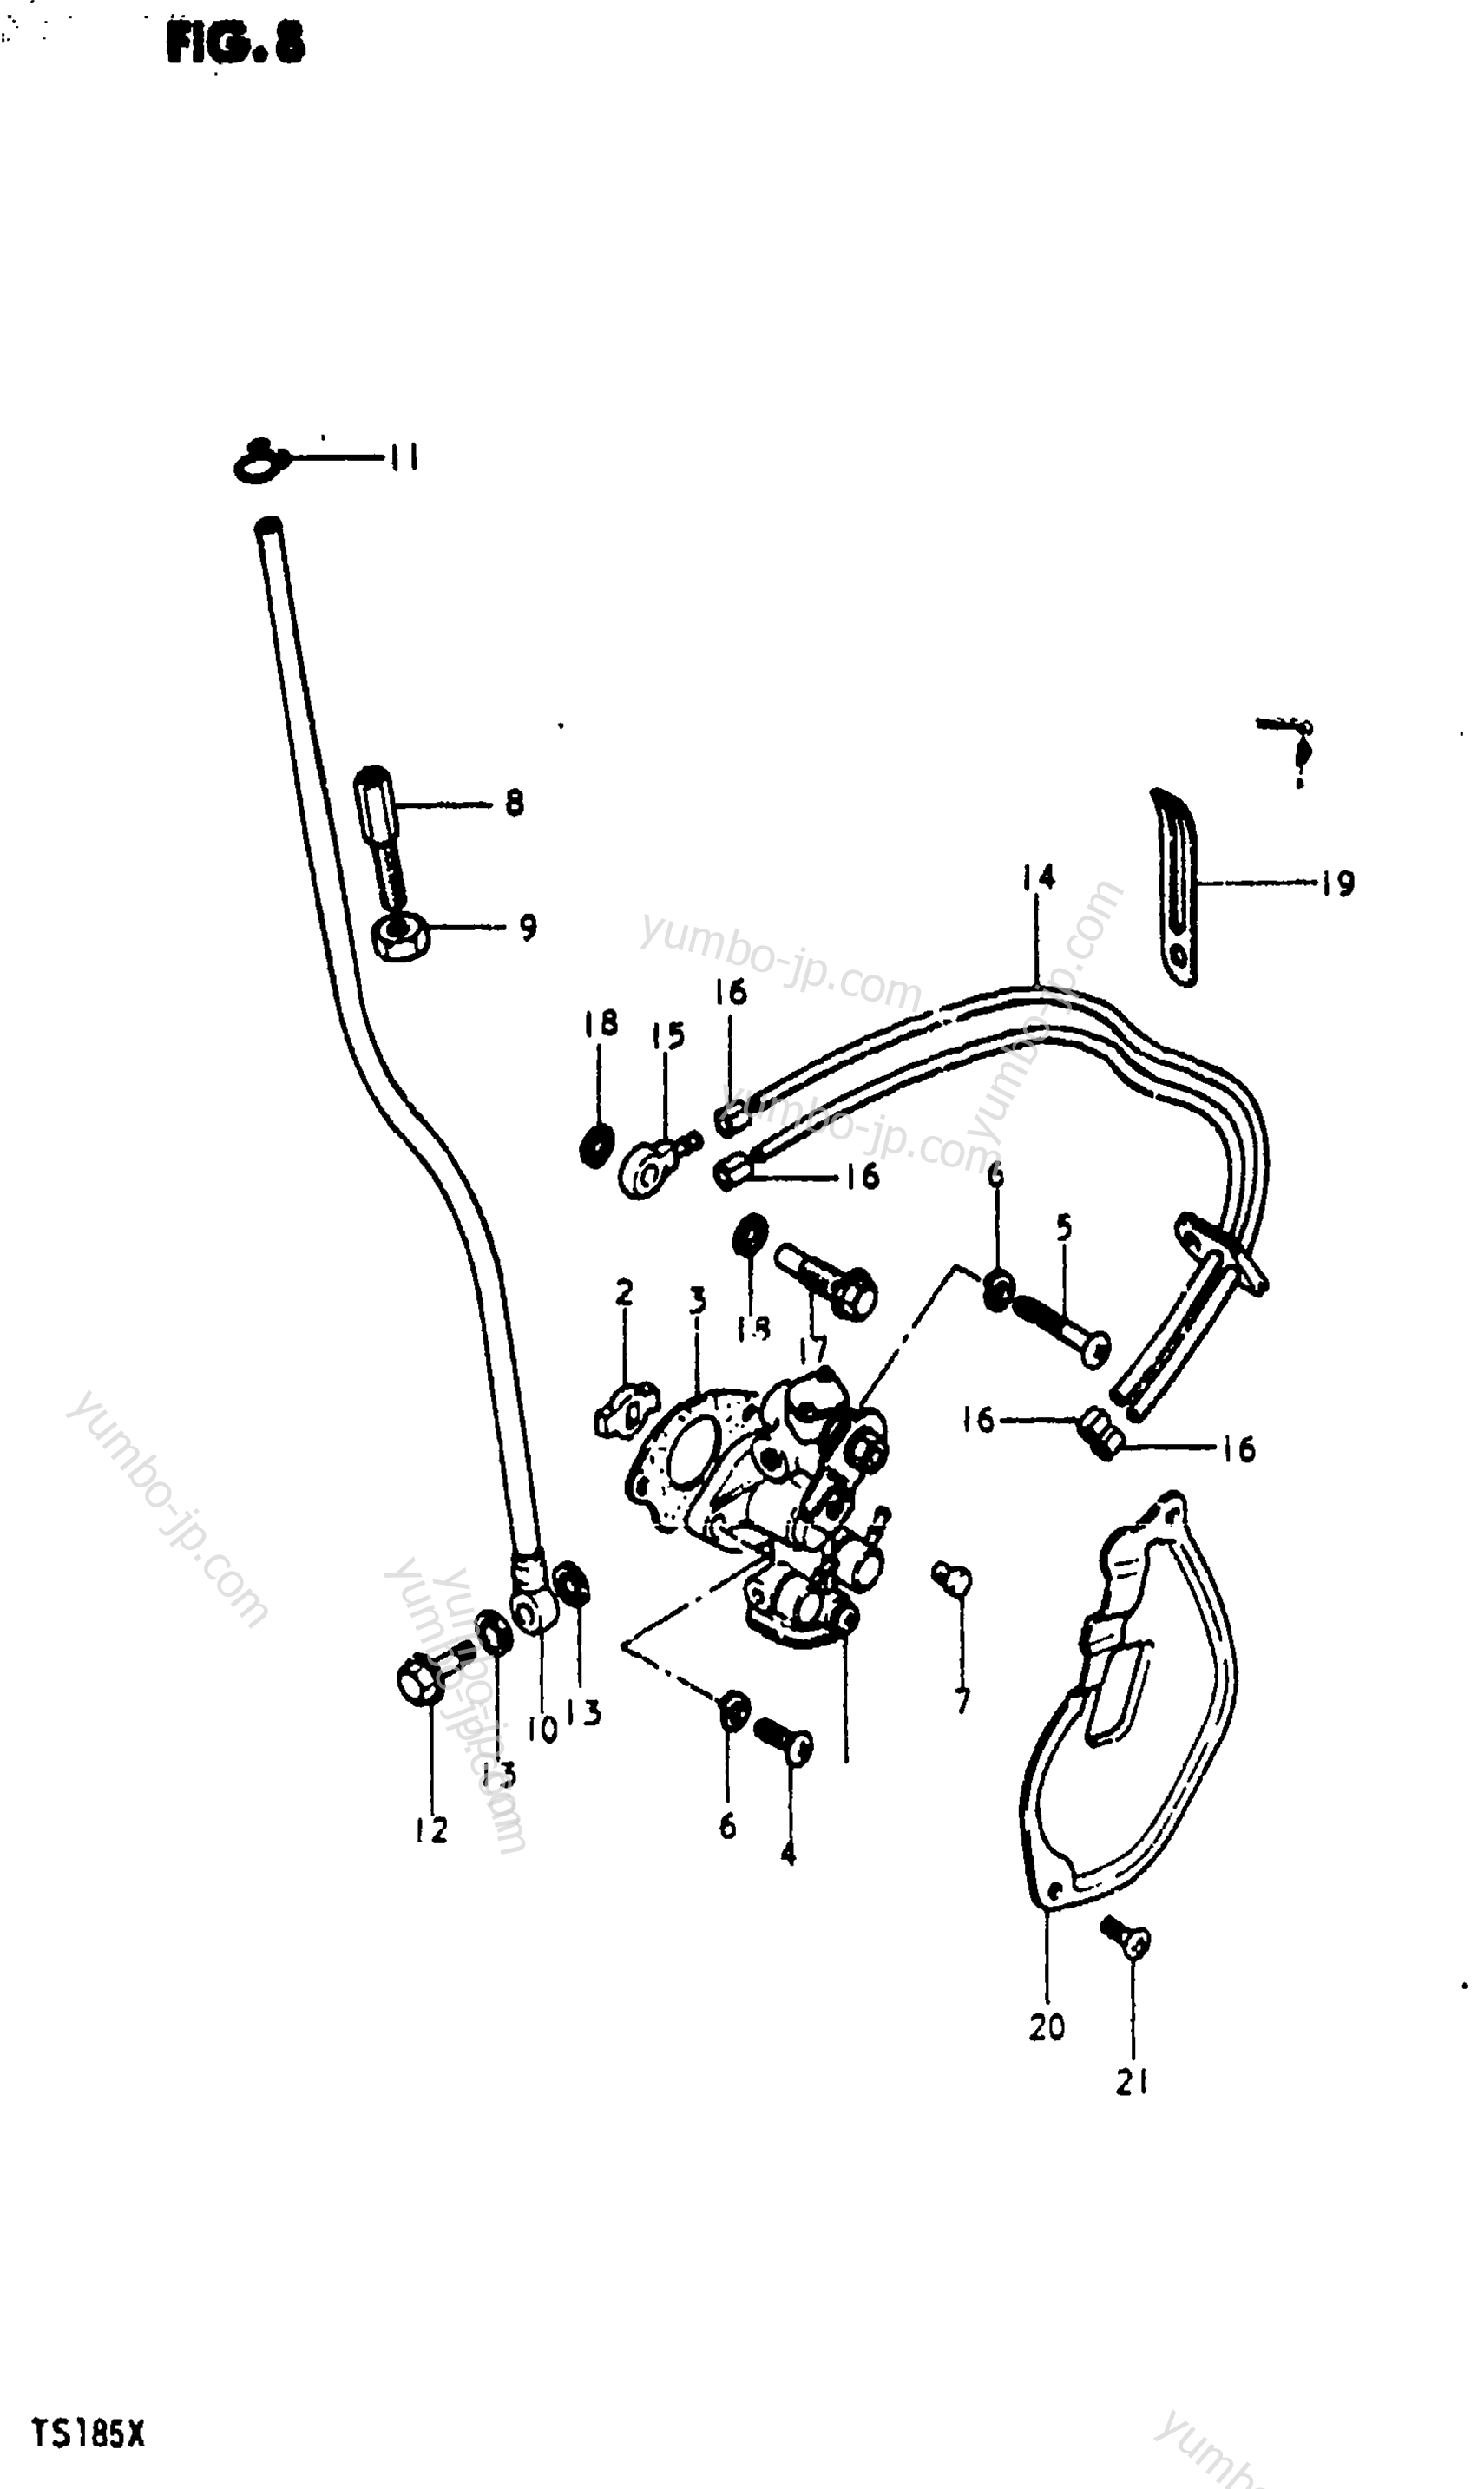 OIL PUMP for motorcycles SUZUKI TS185 1981 year